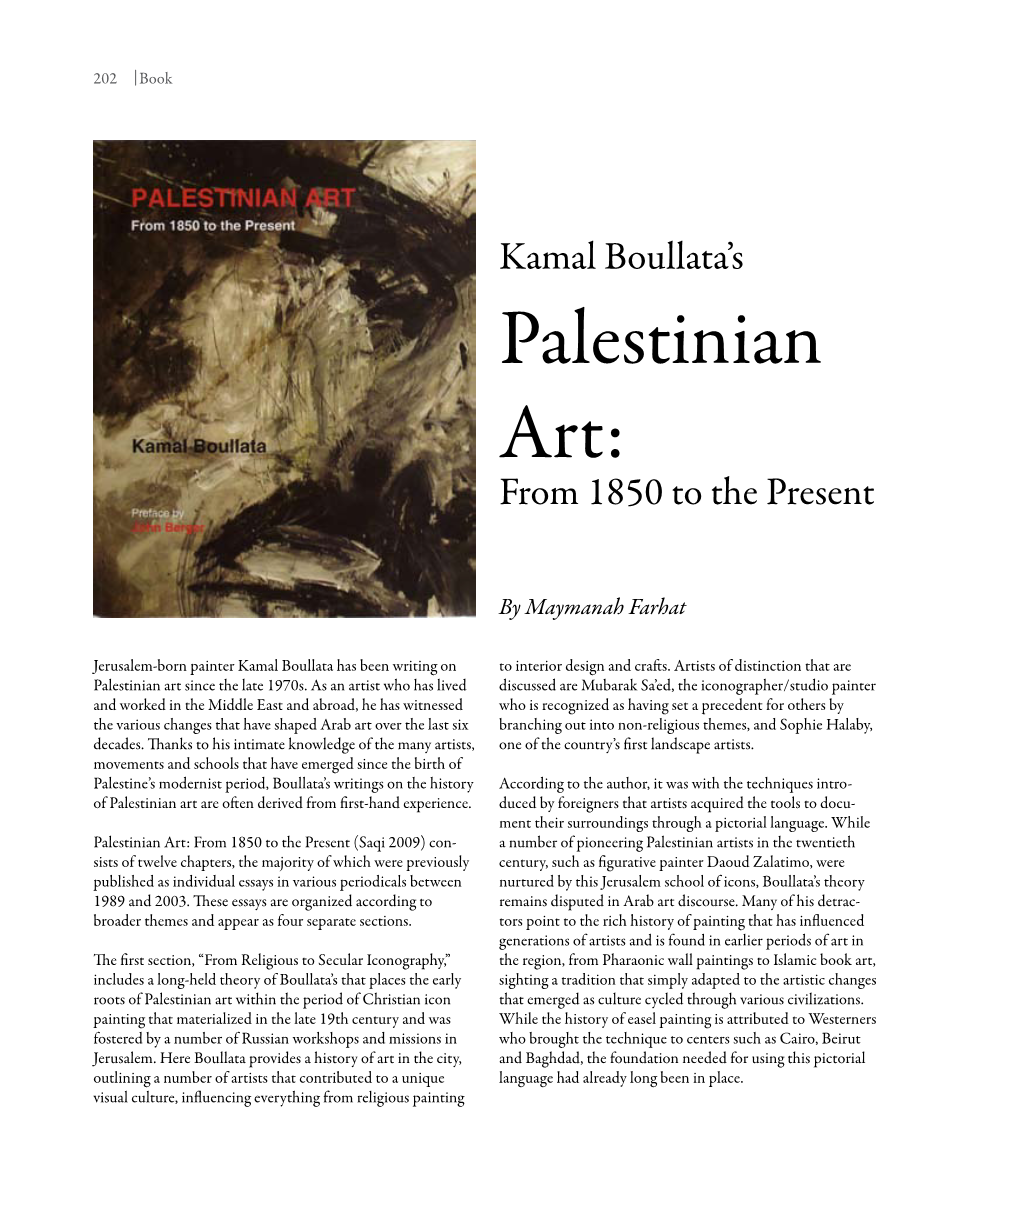 Palestinian Art: from 1850 to the Present